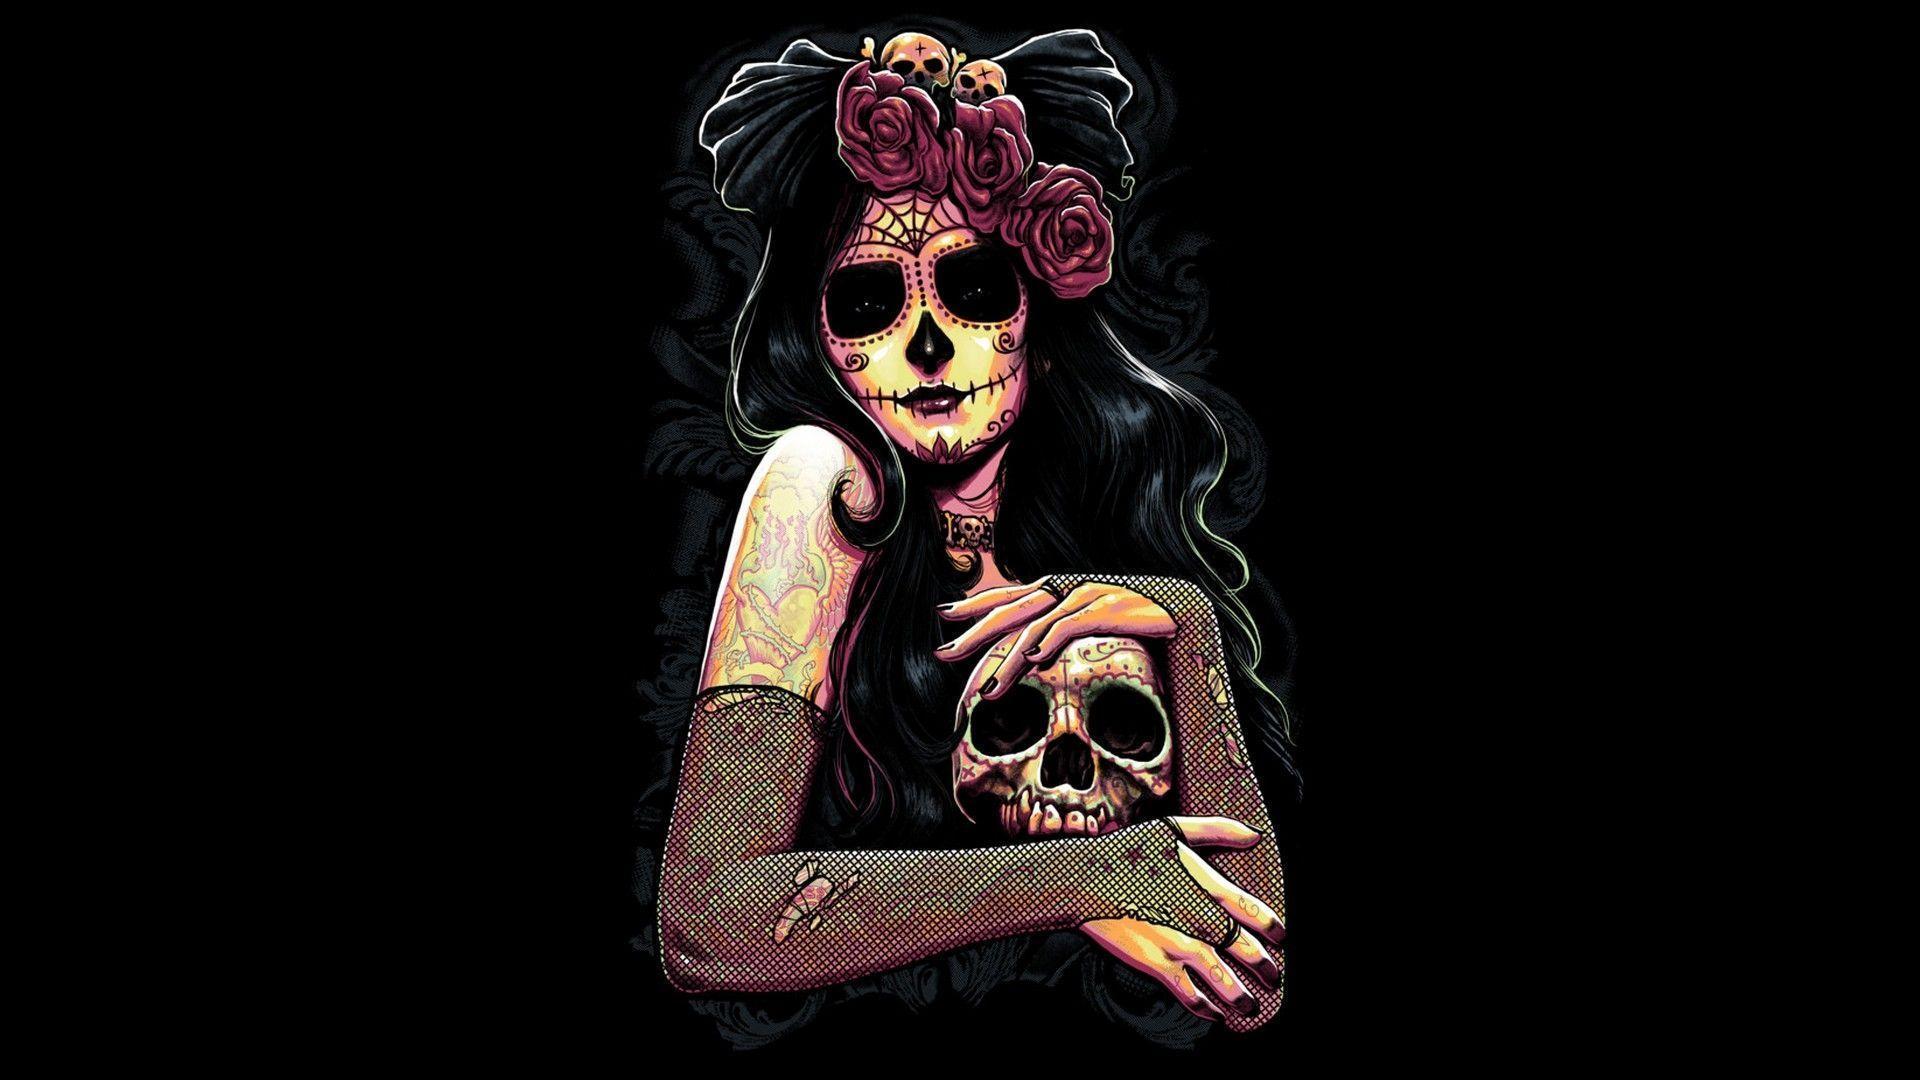 Fantasy Girl With Day Of The Dead Make Up And Skeleton Full HD